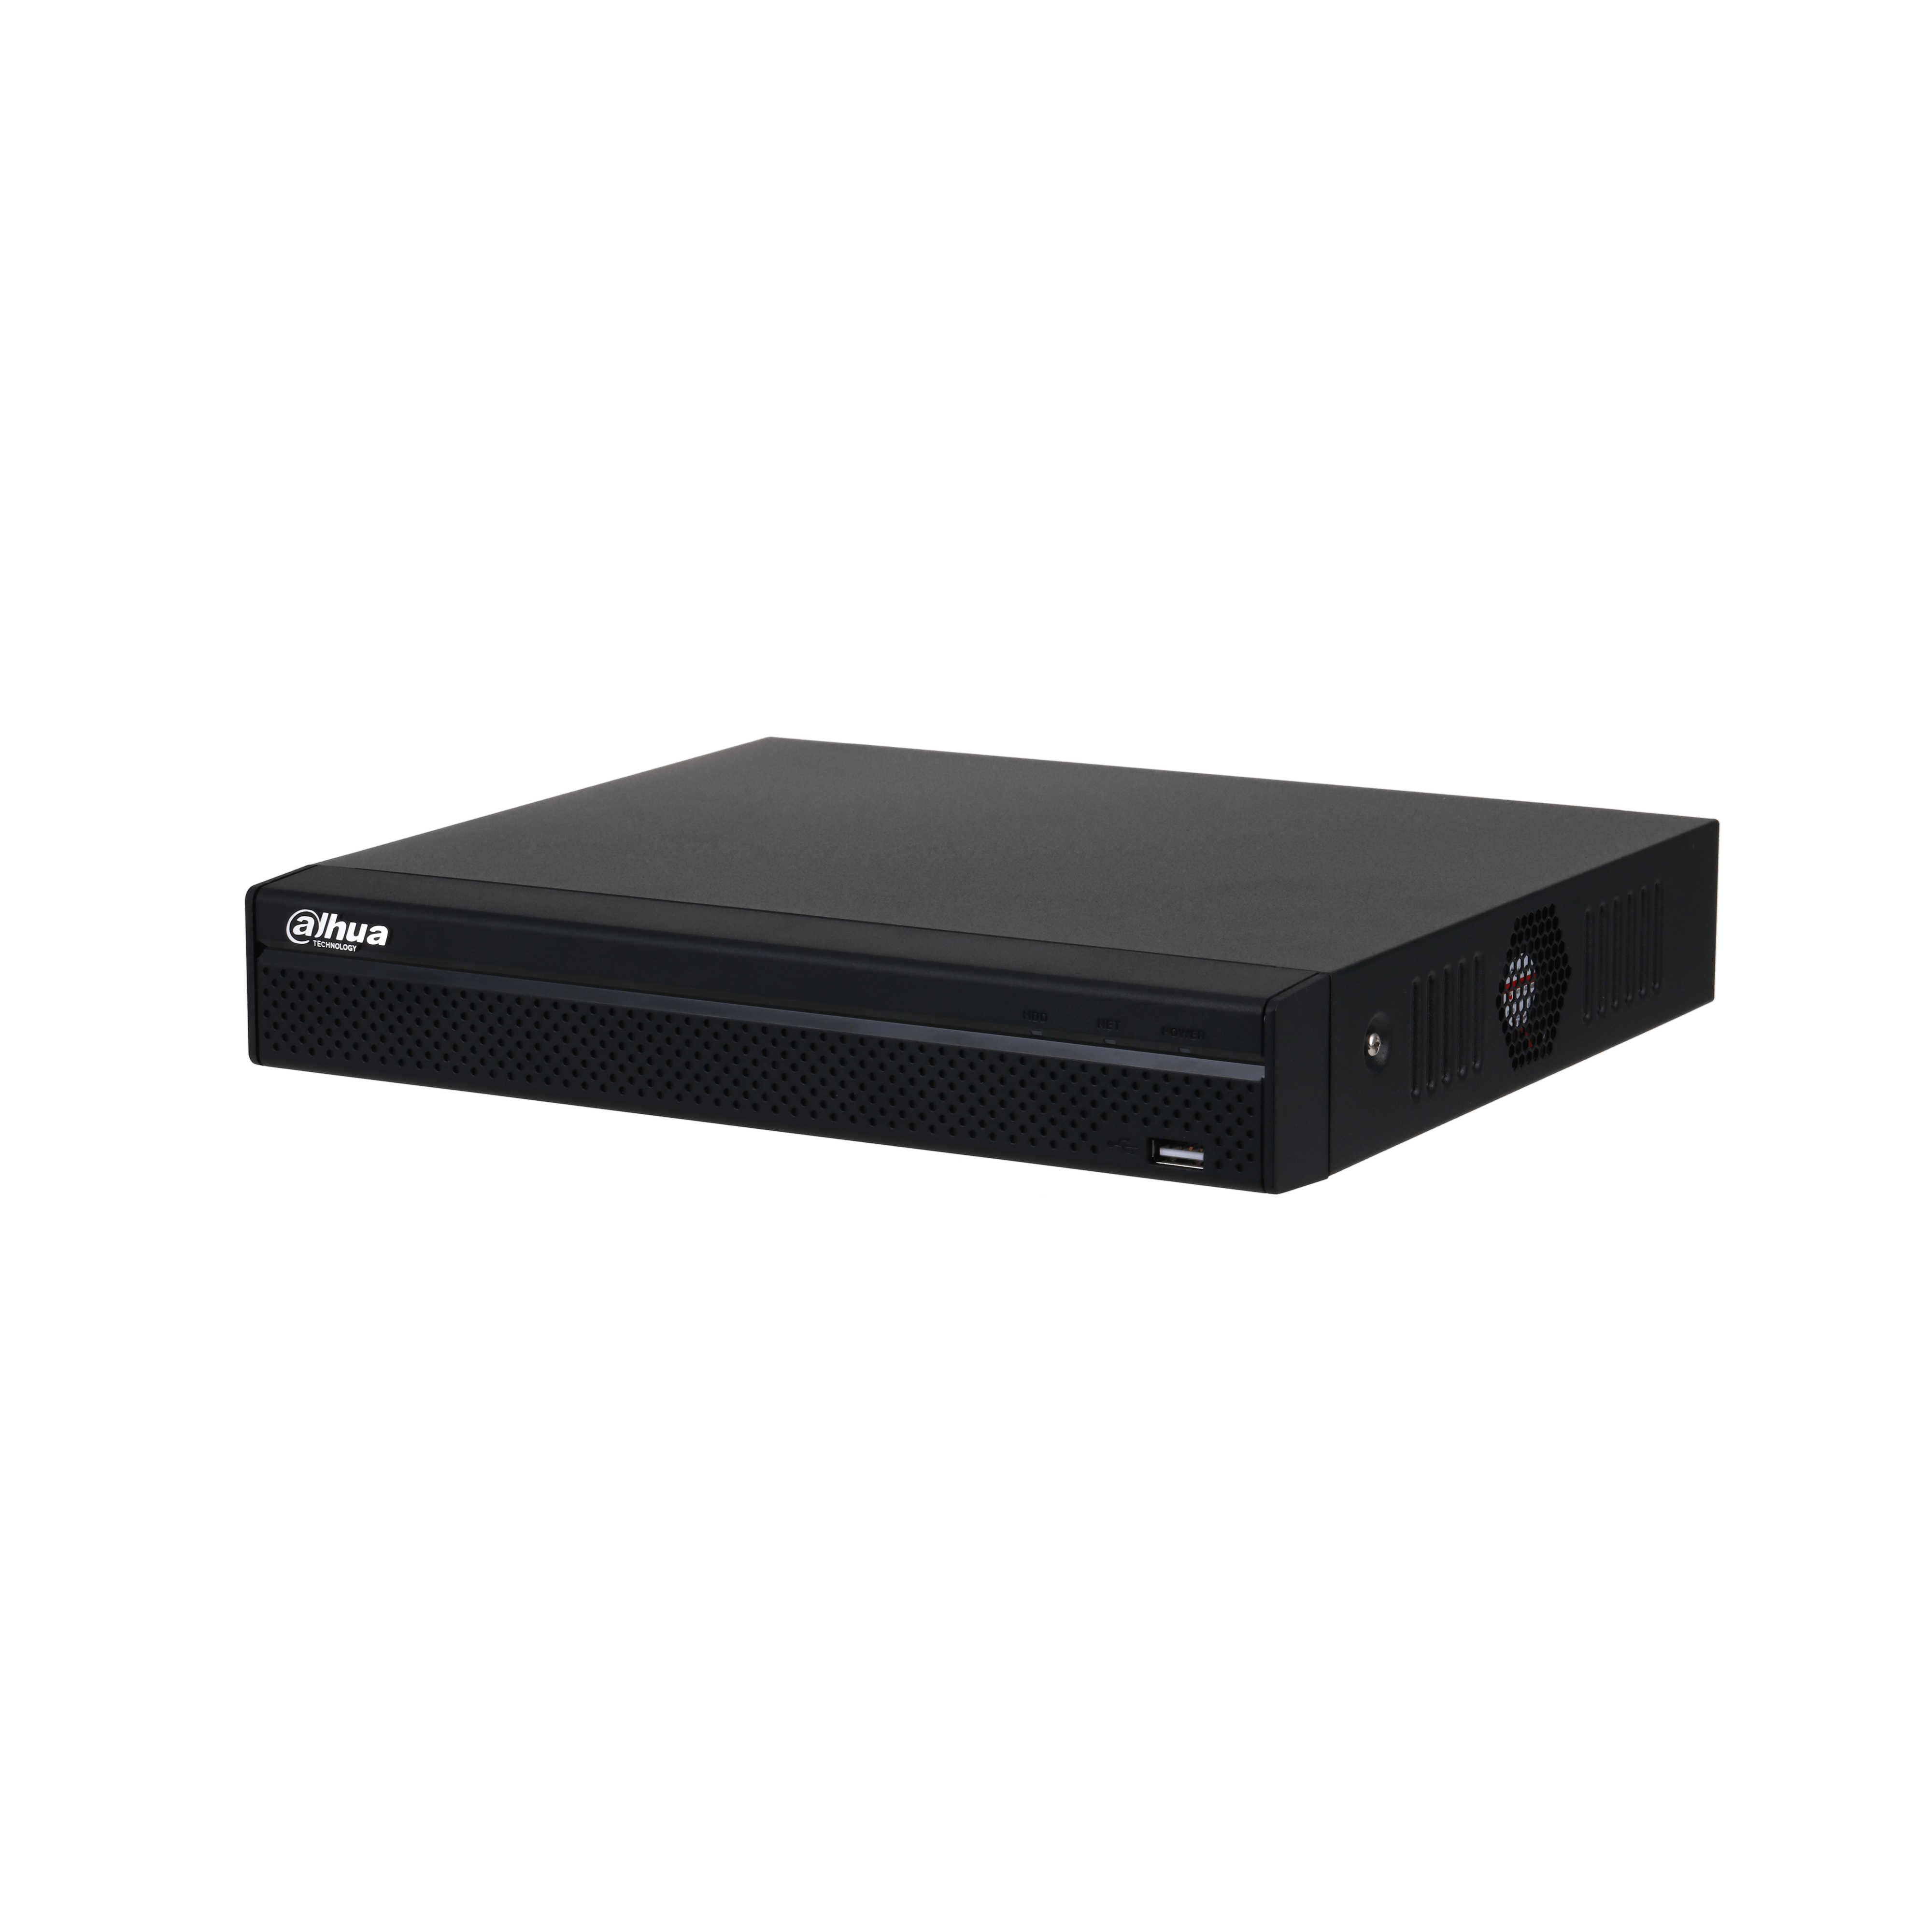 DHI-NVR4108HS-8P-4KS2/L - Dahua - 8 Channel Compact 1HDD 1U 8PoE Network Video Recorder